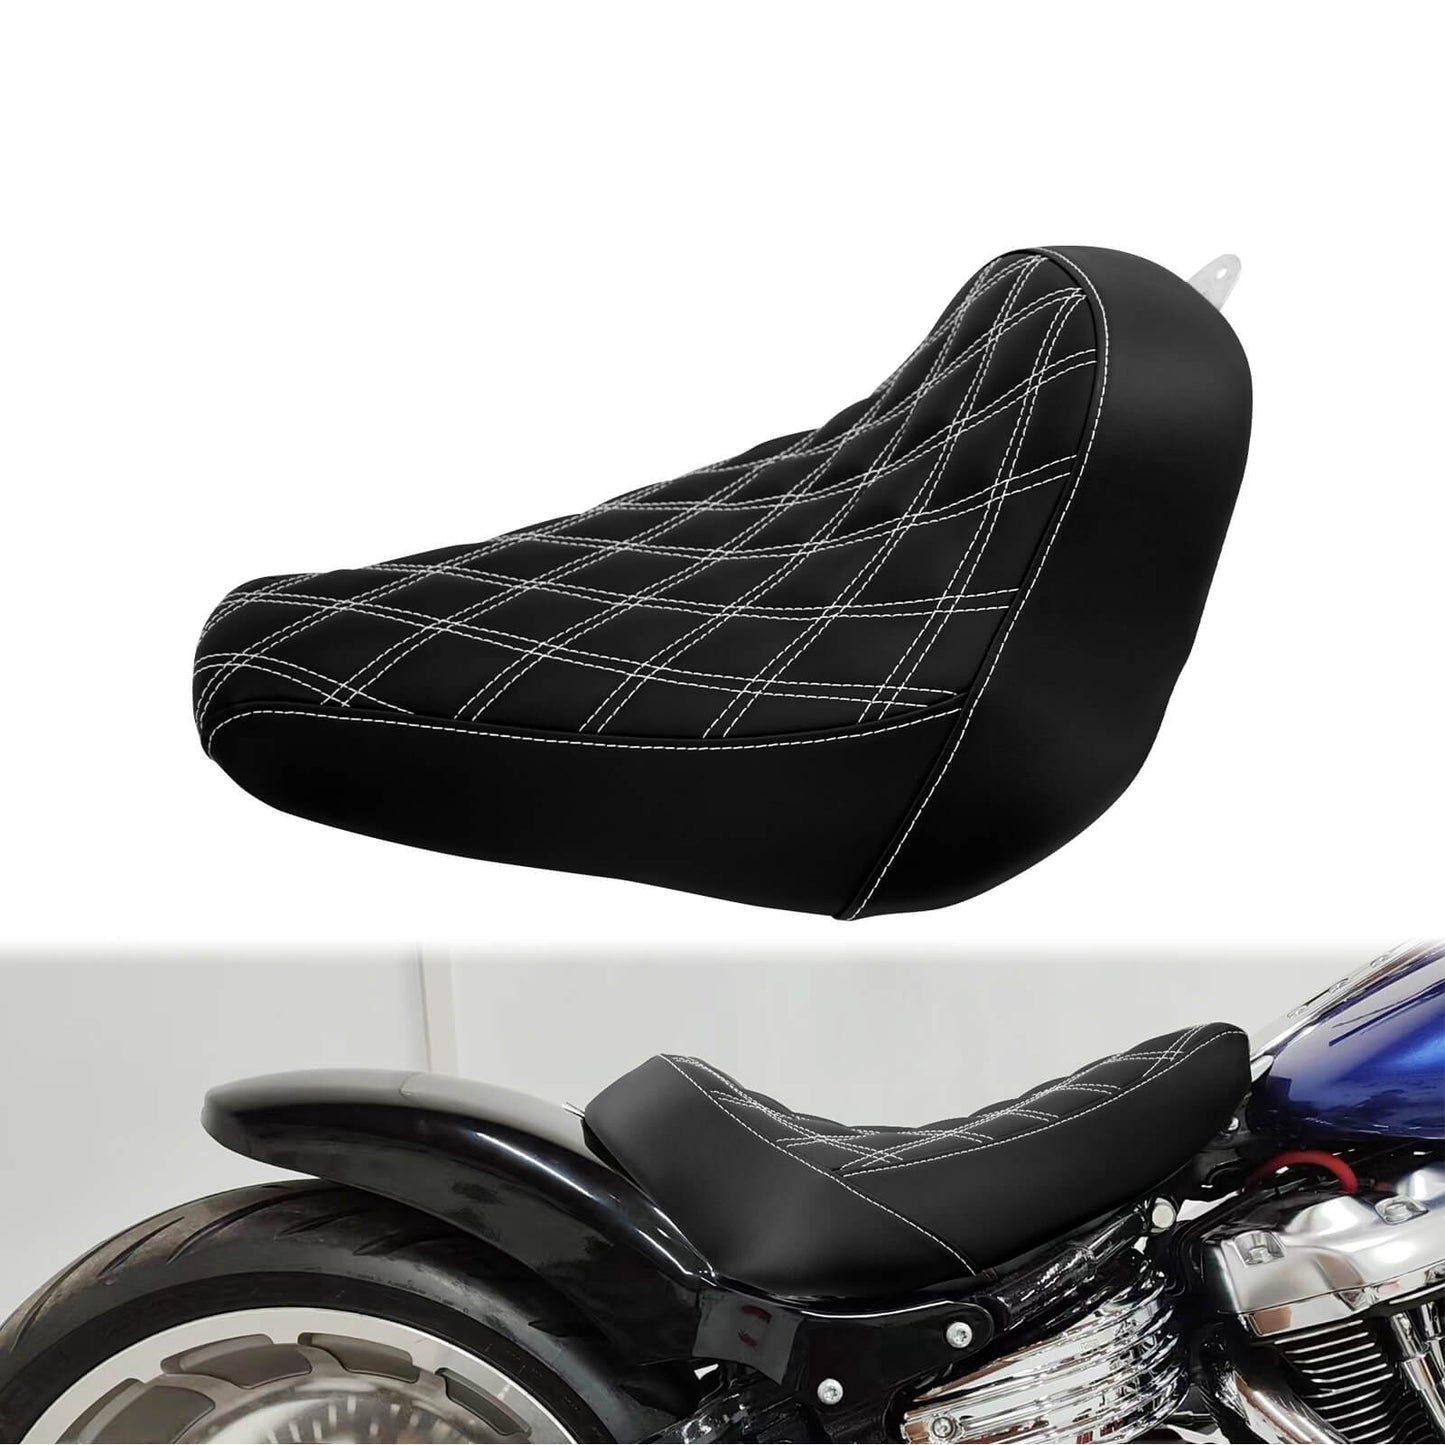 CB013001-mactions-rider-seat-for-harley-fatboy